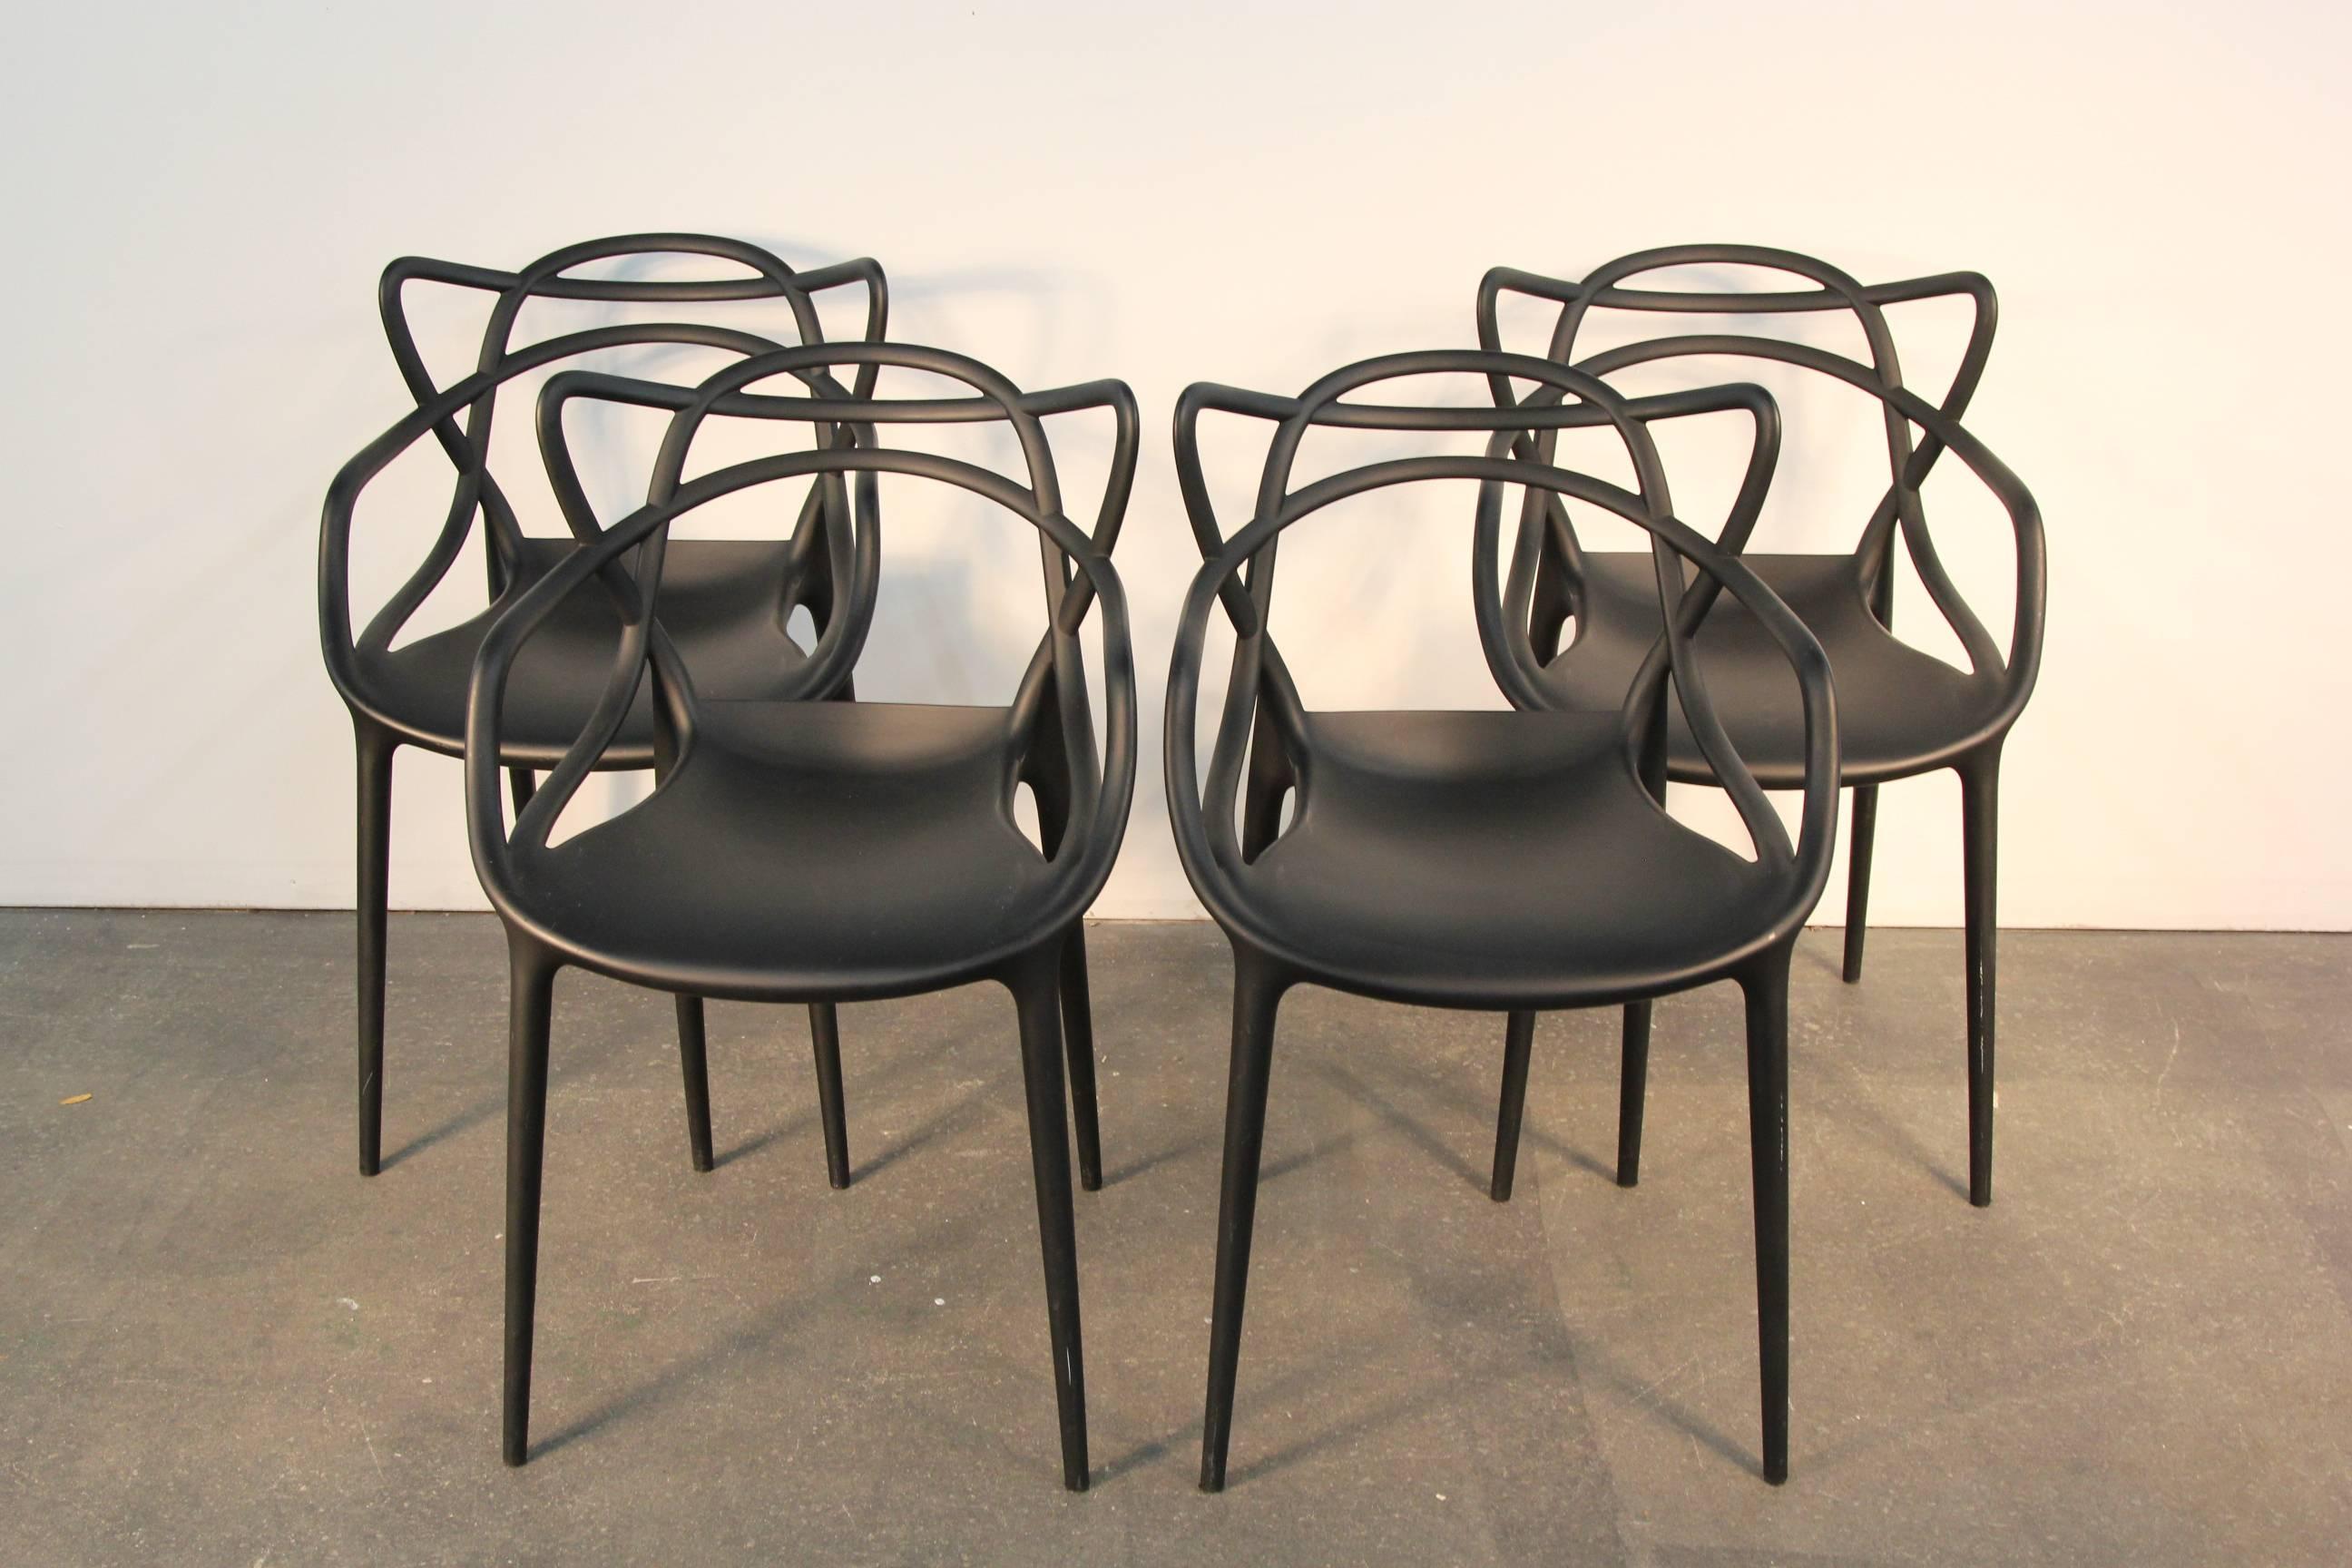 philippe starck for kartell masters chair